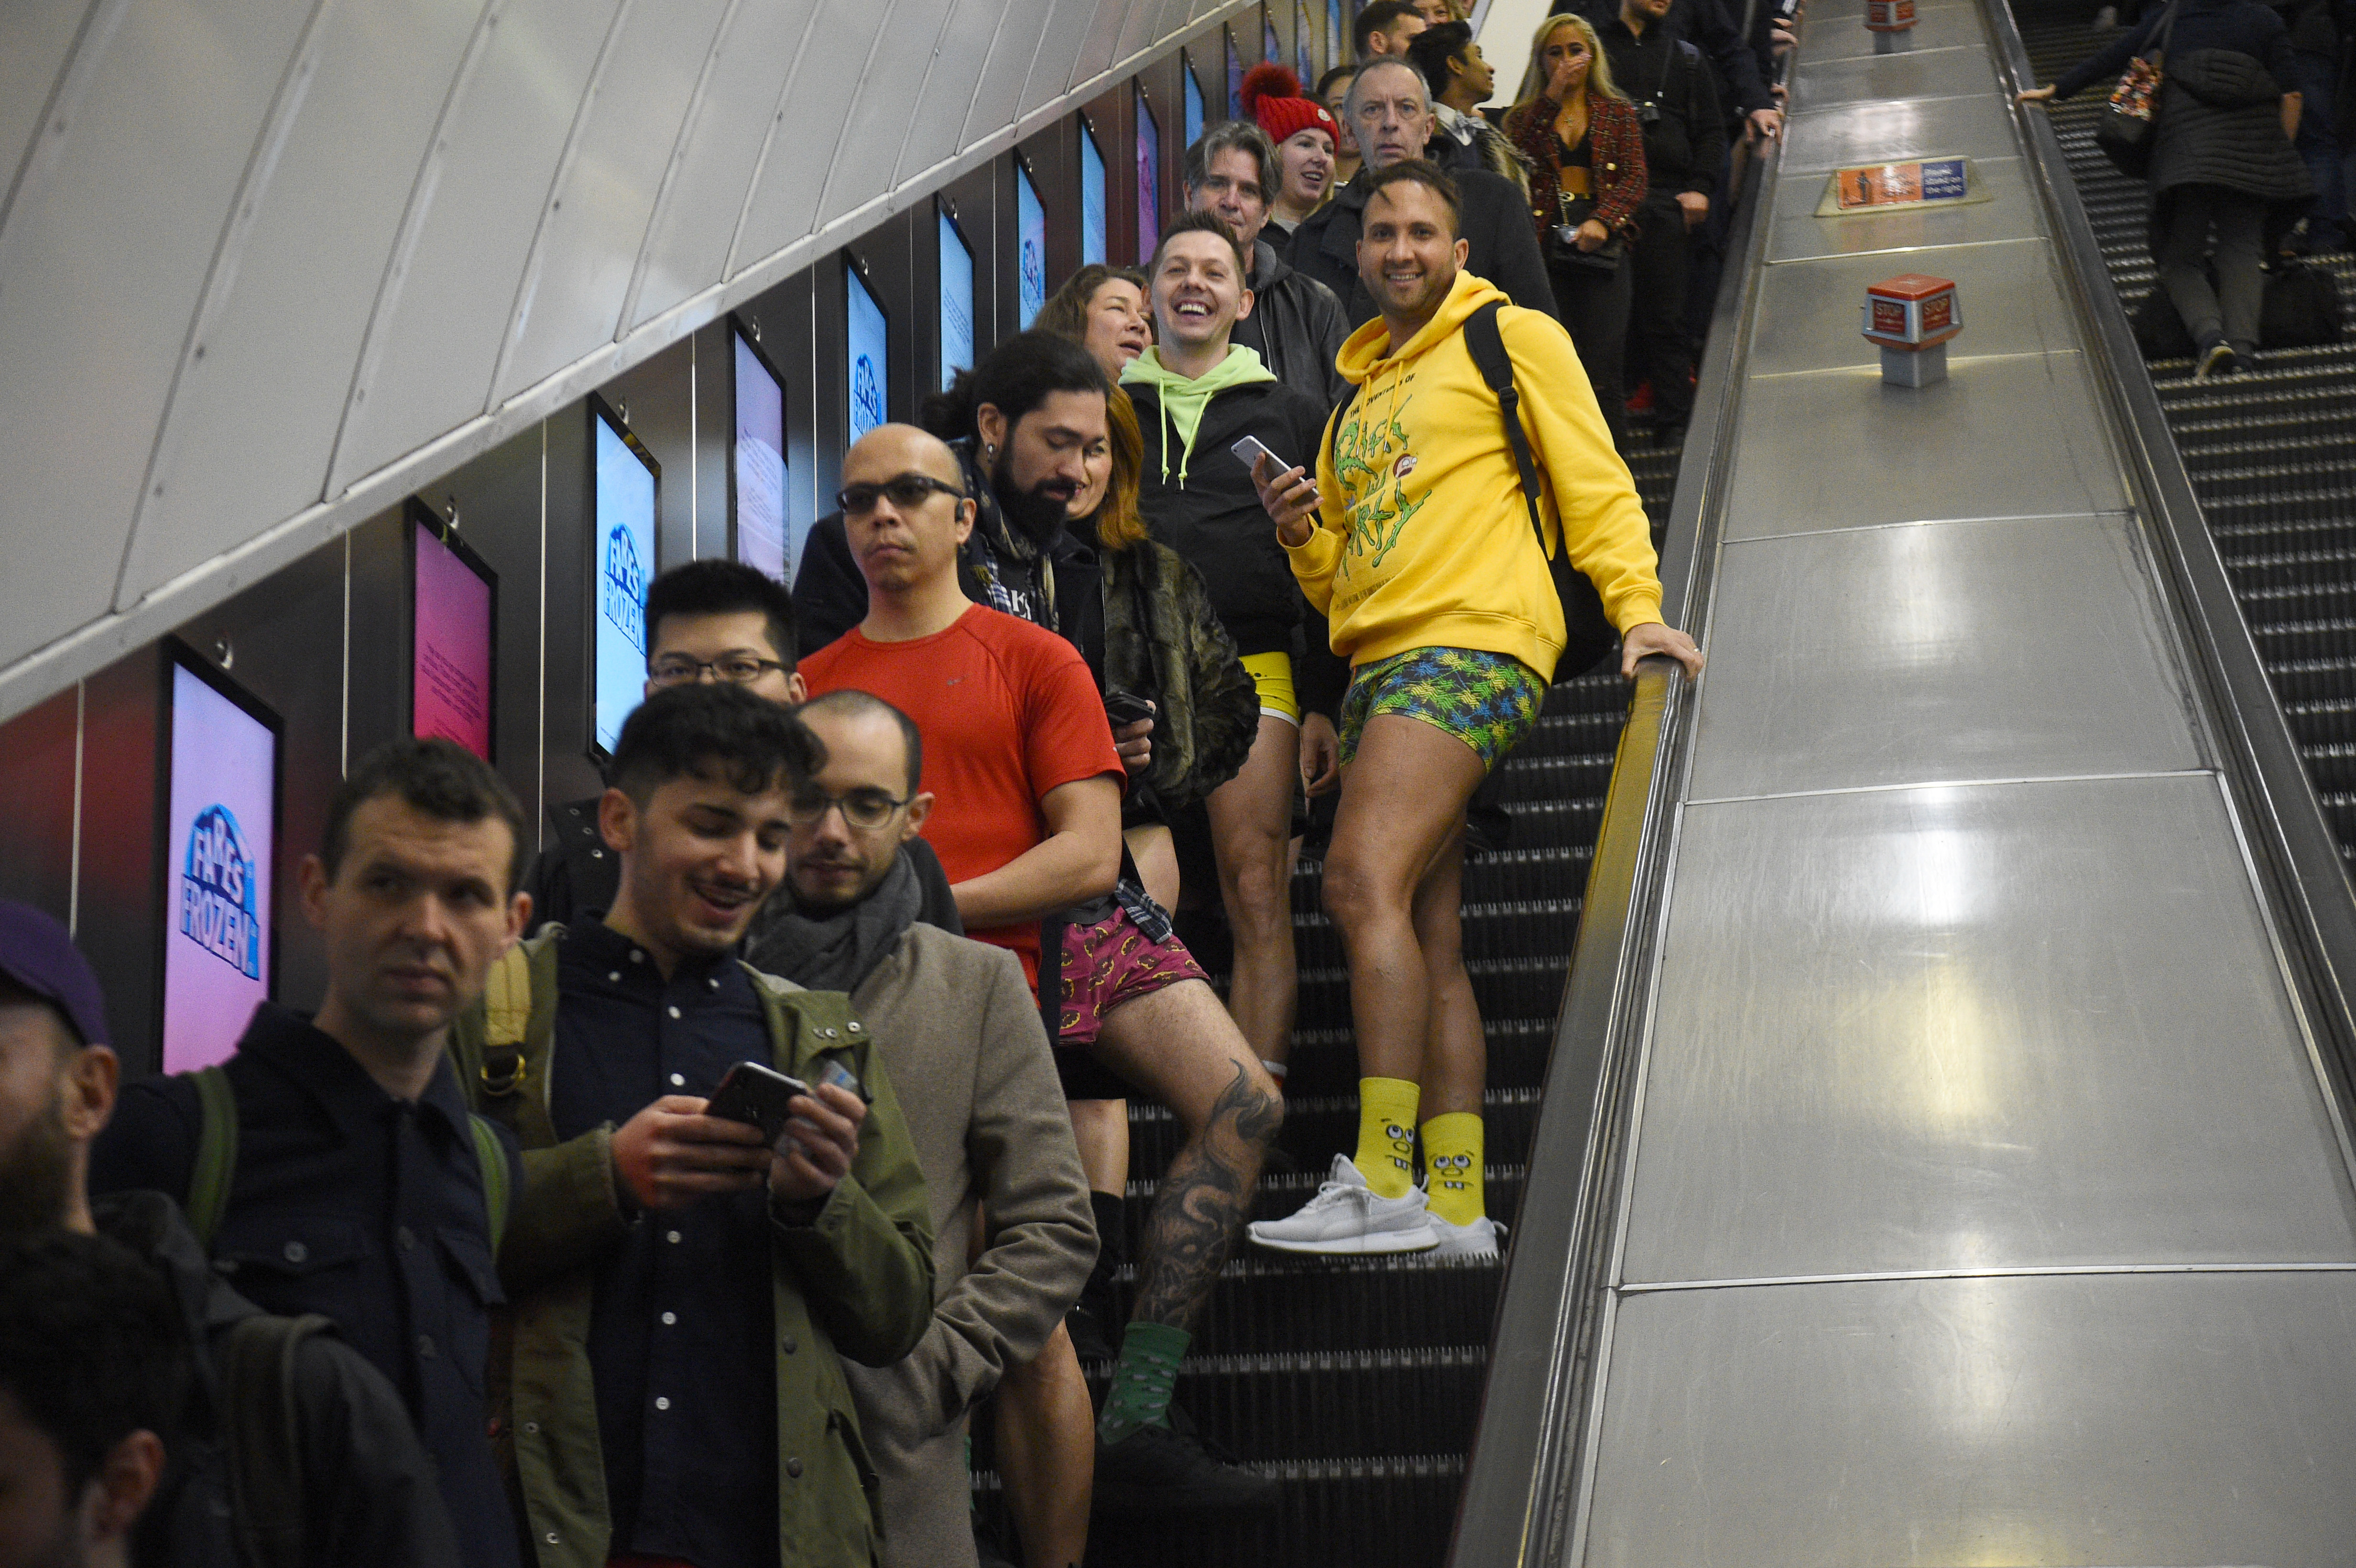 People take part in the 11th annual No Trousers Tube Ride in London.